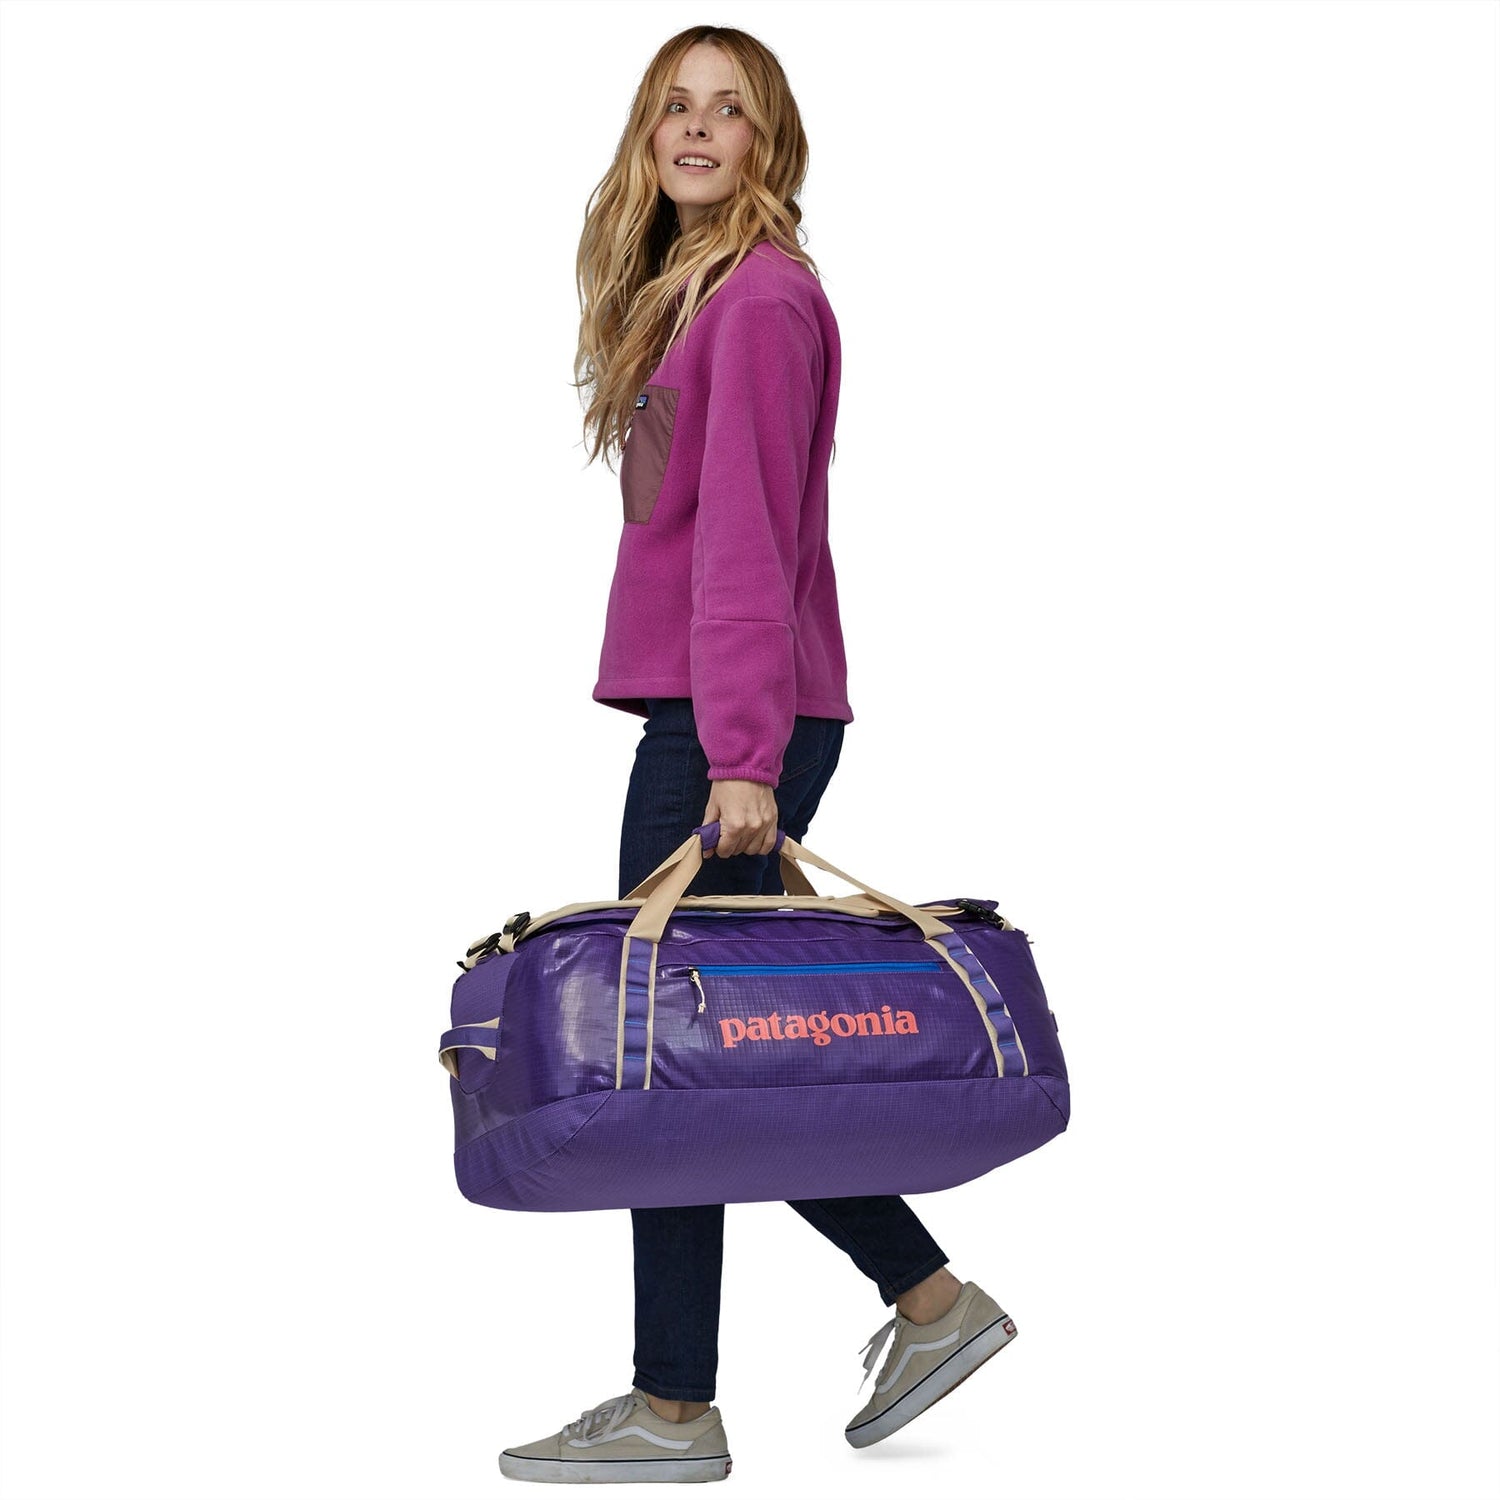 Patagonia Black Hole Duffel Bag 55L - 100 % Recycled Polyester Perennial Purple Bags